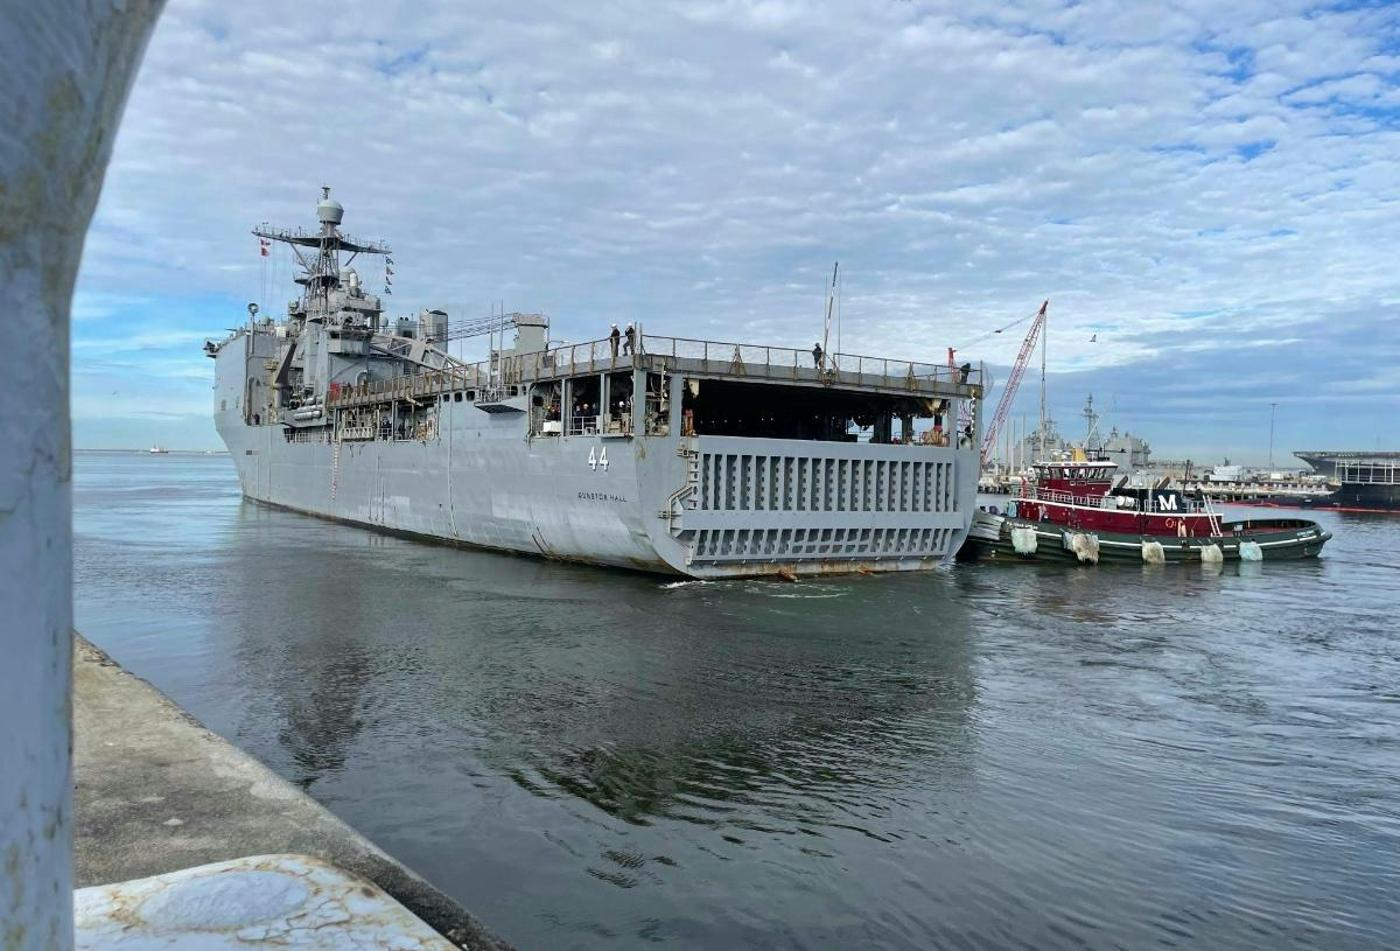 The Whidbey Island-class dock landing ship, USS Gunston Hall (LSD 44), departs Naval Station Norfolk to commence operations for Steadfast Defender 2024, NATO’s largest exercise in decades. Steadfast Defender will demonstrate NATO's readiness and ability to deploy forces rapidly from across the Alliance to reinforce the defence of Europe. Photo © NATO
)